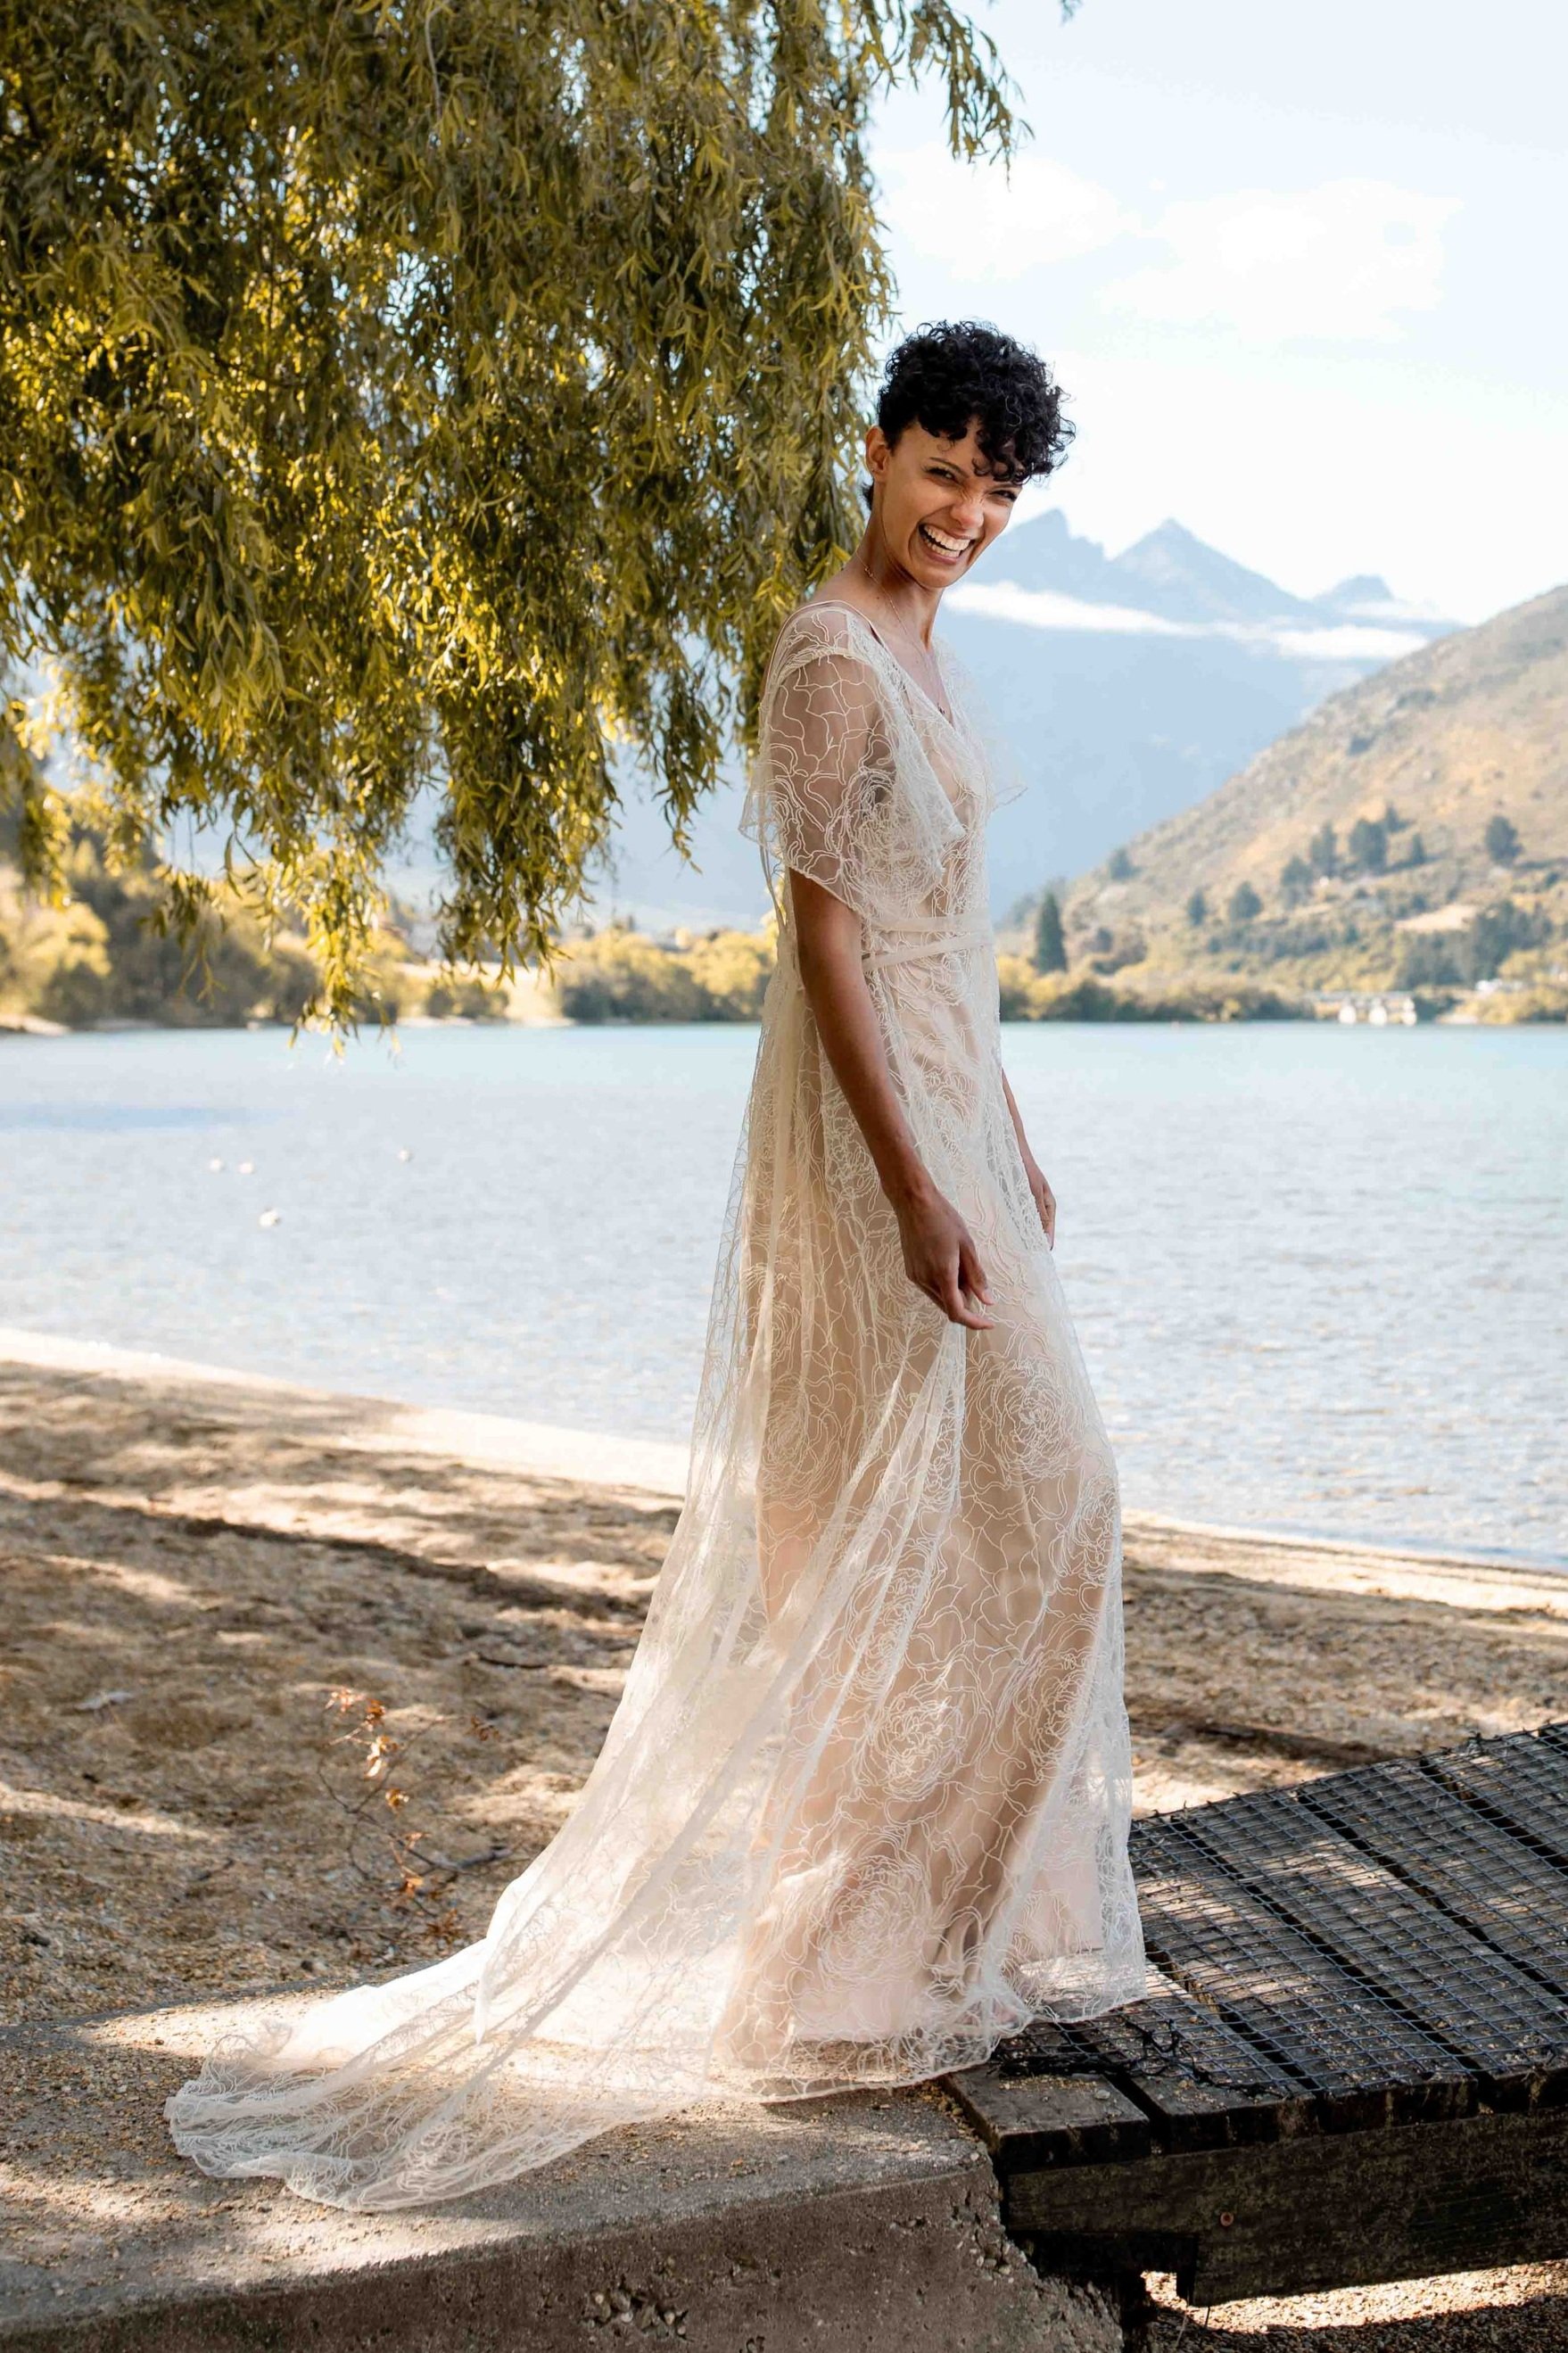 Peony+Lace+Wrap+w+Nude+Slip+-+Nemo+Bridal+Couture+Queenstown+New+Zealand+0V9A2235.jpg